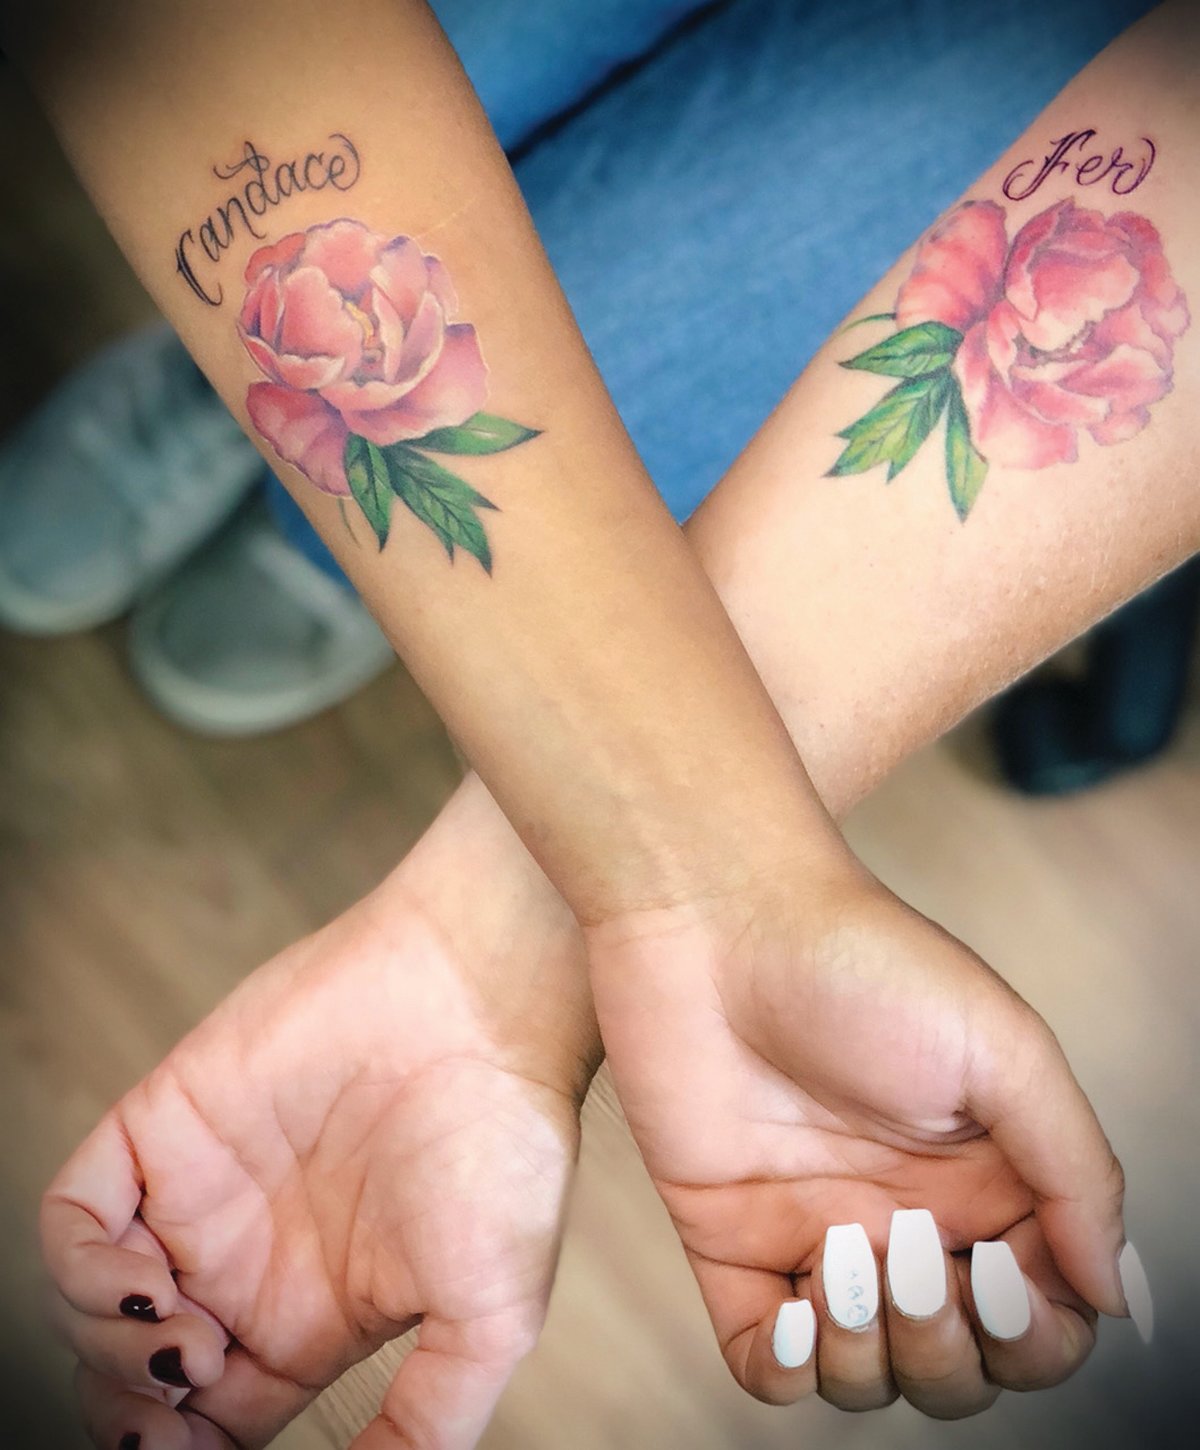 MATCHING MEMENTOS: Candace Johndrow and her newly adopted daughter, Fer, show off matching tattoos they received to commemorate their bond of family. Fer is a Venezuelan immigrant who found herself in Rhode Island’s foster care system. After being placed with Candace, two weeks before Christmas in 2016, the pair quickly decided to “adopt each other” and become a family.